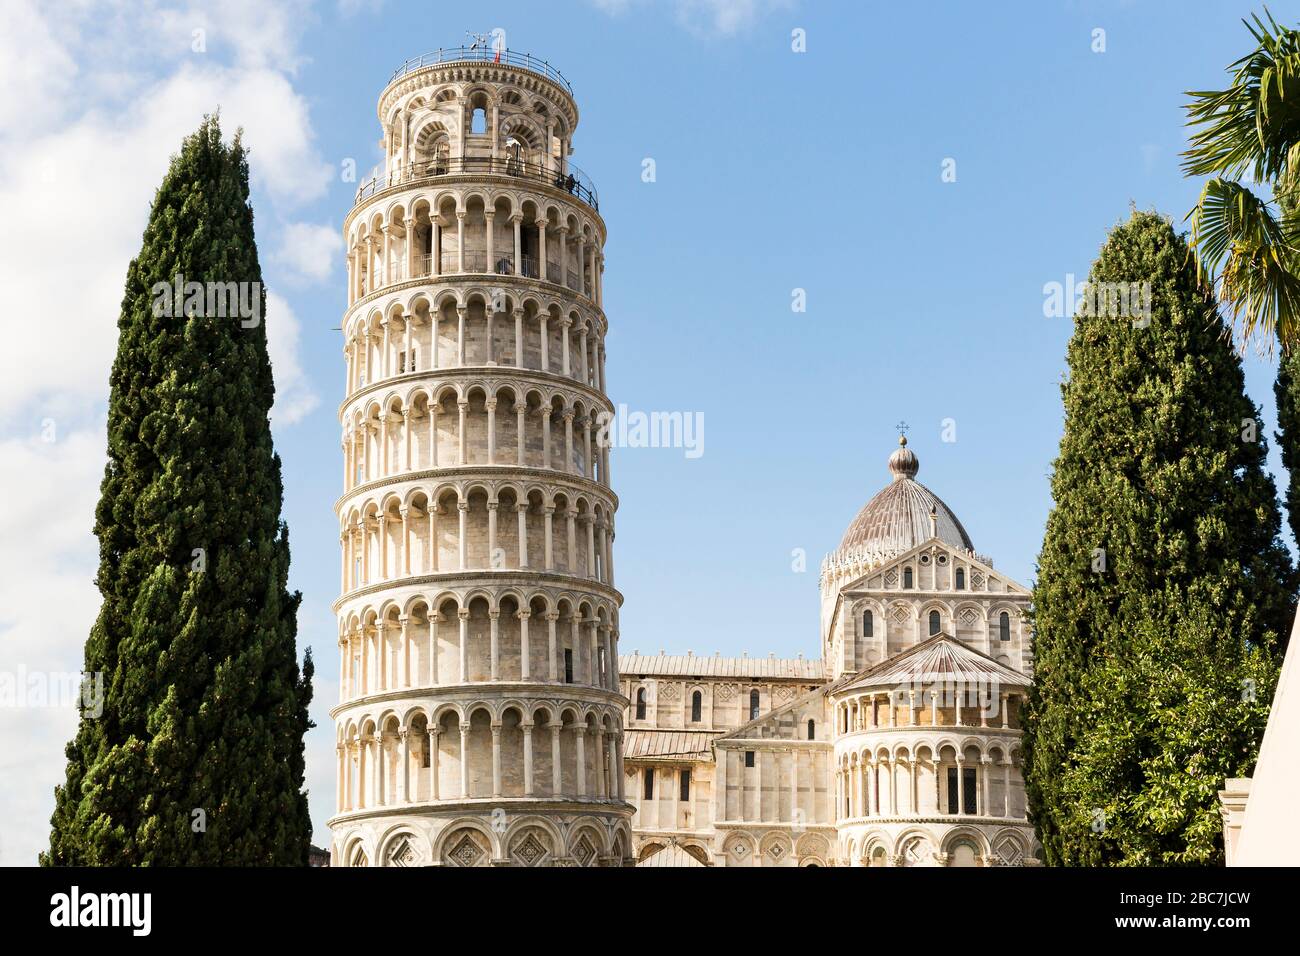 Beautiful Sights of Leaning Tower of Pisa in Piazza dei Miracoli , Tuscany Region, Italy. Stock Photo